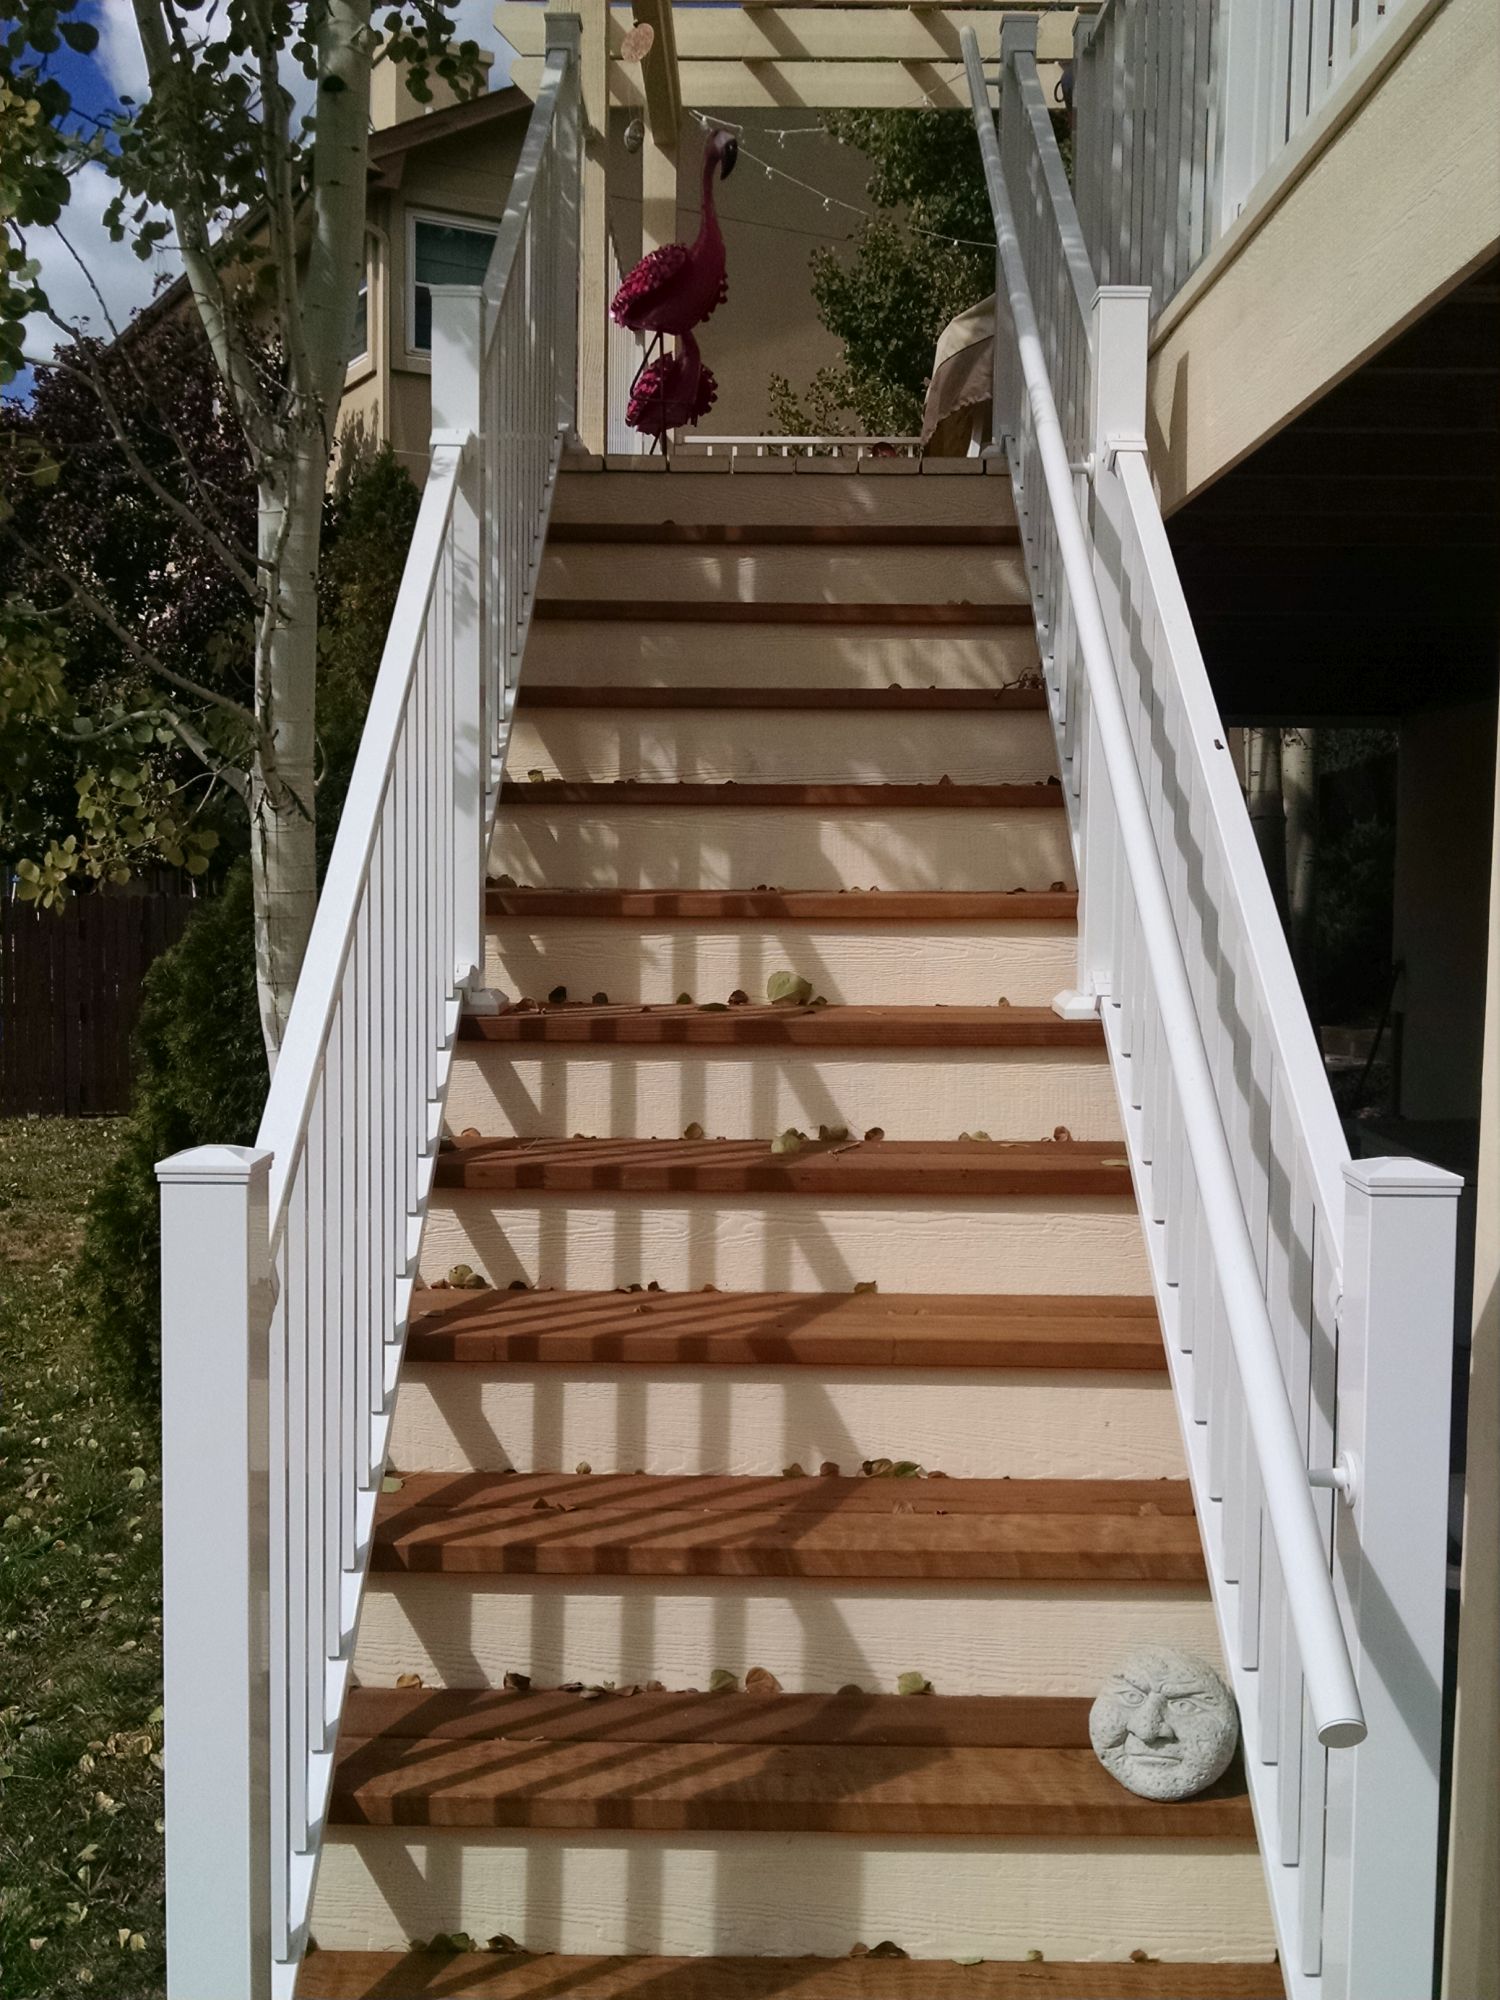 3'-wide closed deck stairs with a white aluminum railing and handrail.